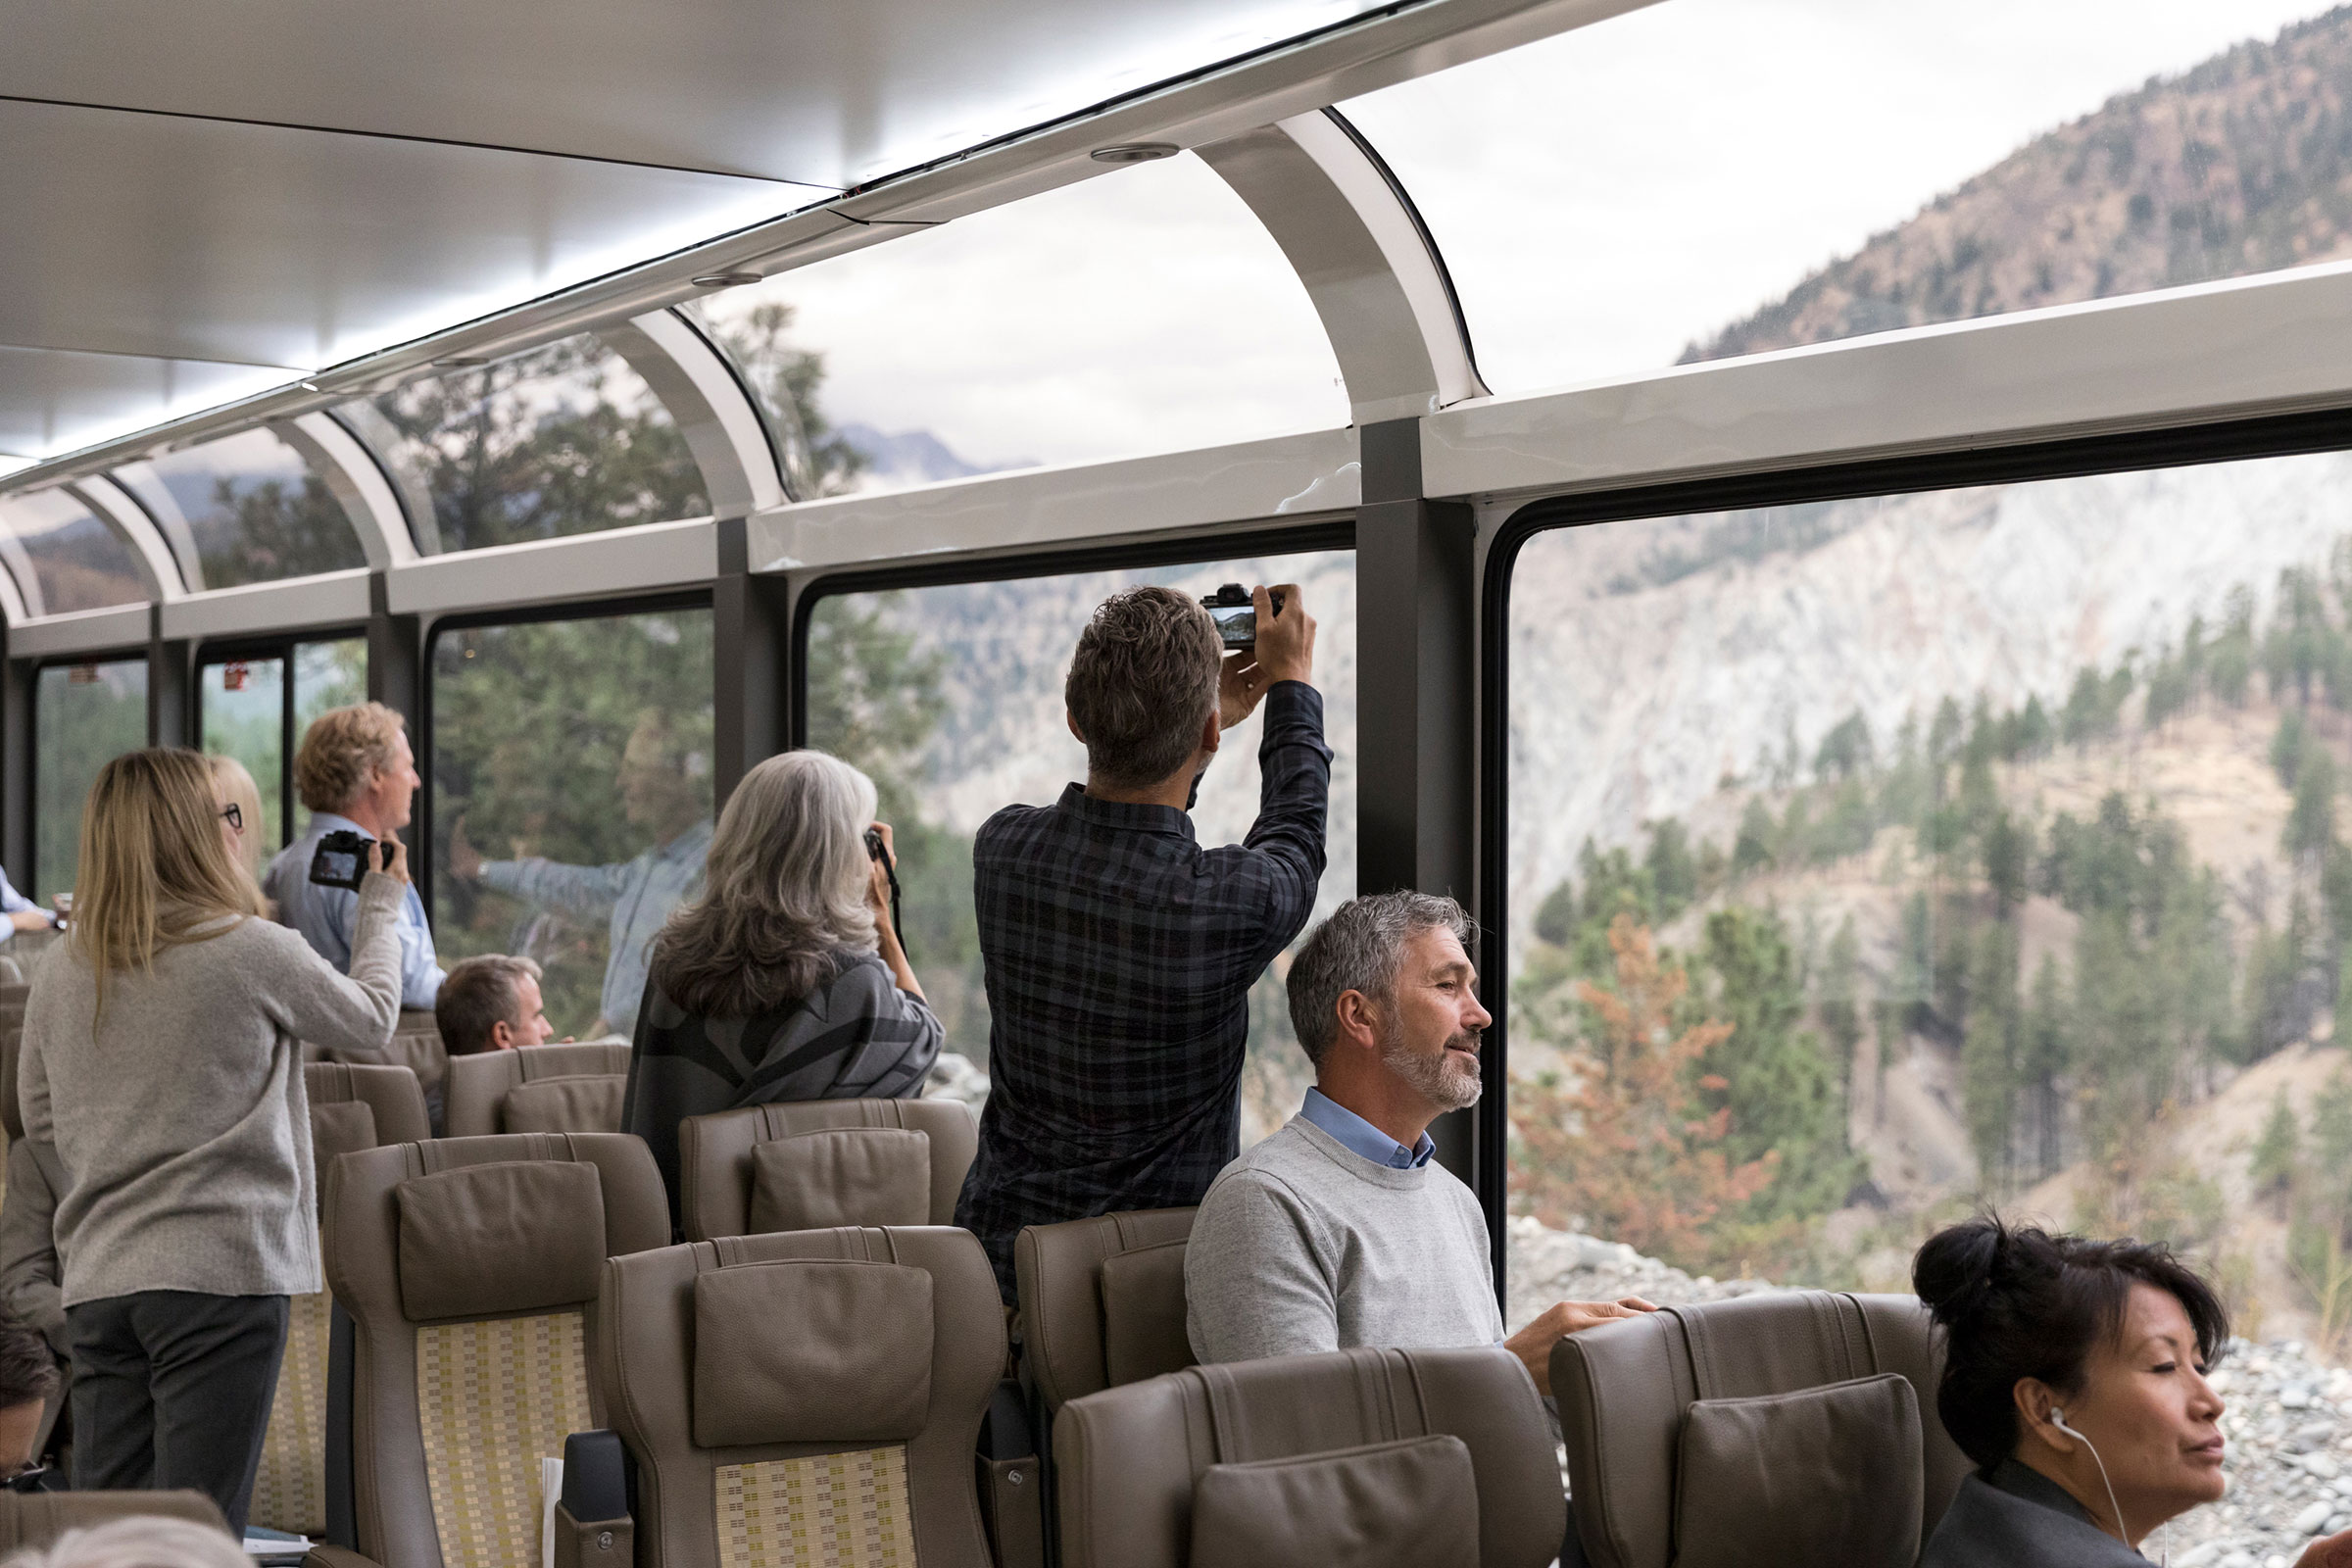 An interior train view of Rocky Mountaineer's Rockies to the Red Rocks train route, which is a two-day trip through the landscapes between Moab, Utah and Denver. (Courtesy Rocky Mountaineer)